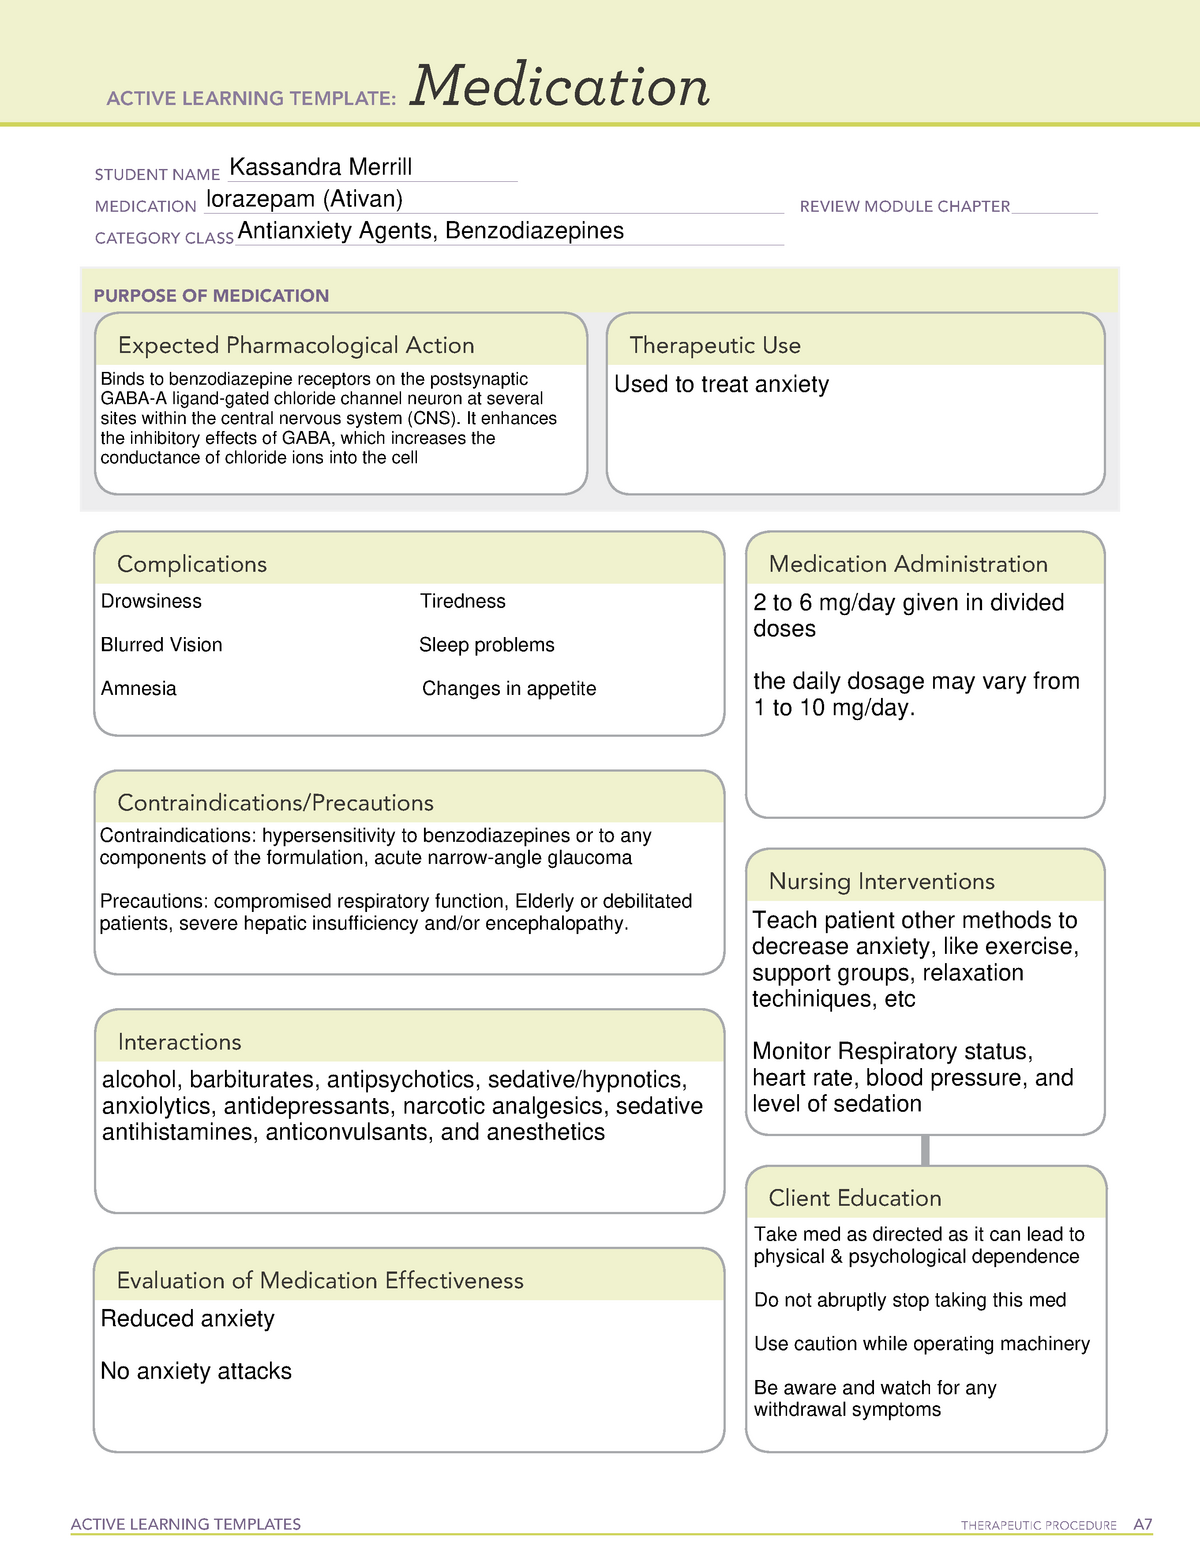 Lorazepam Template ACTIVE LEARNING TEMPLATES THERAPEUTIC PROCEDURE A